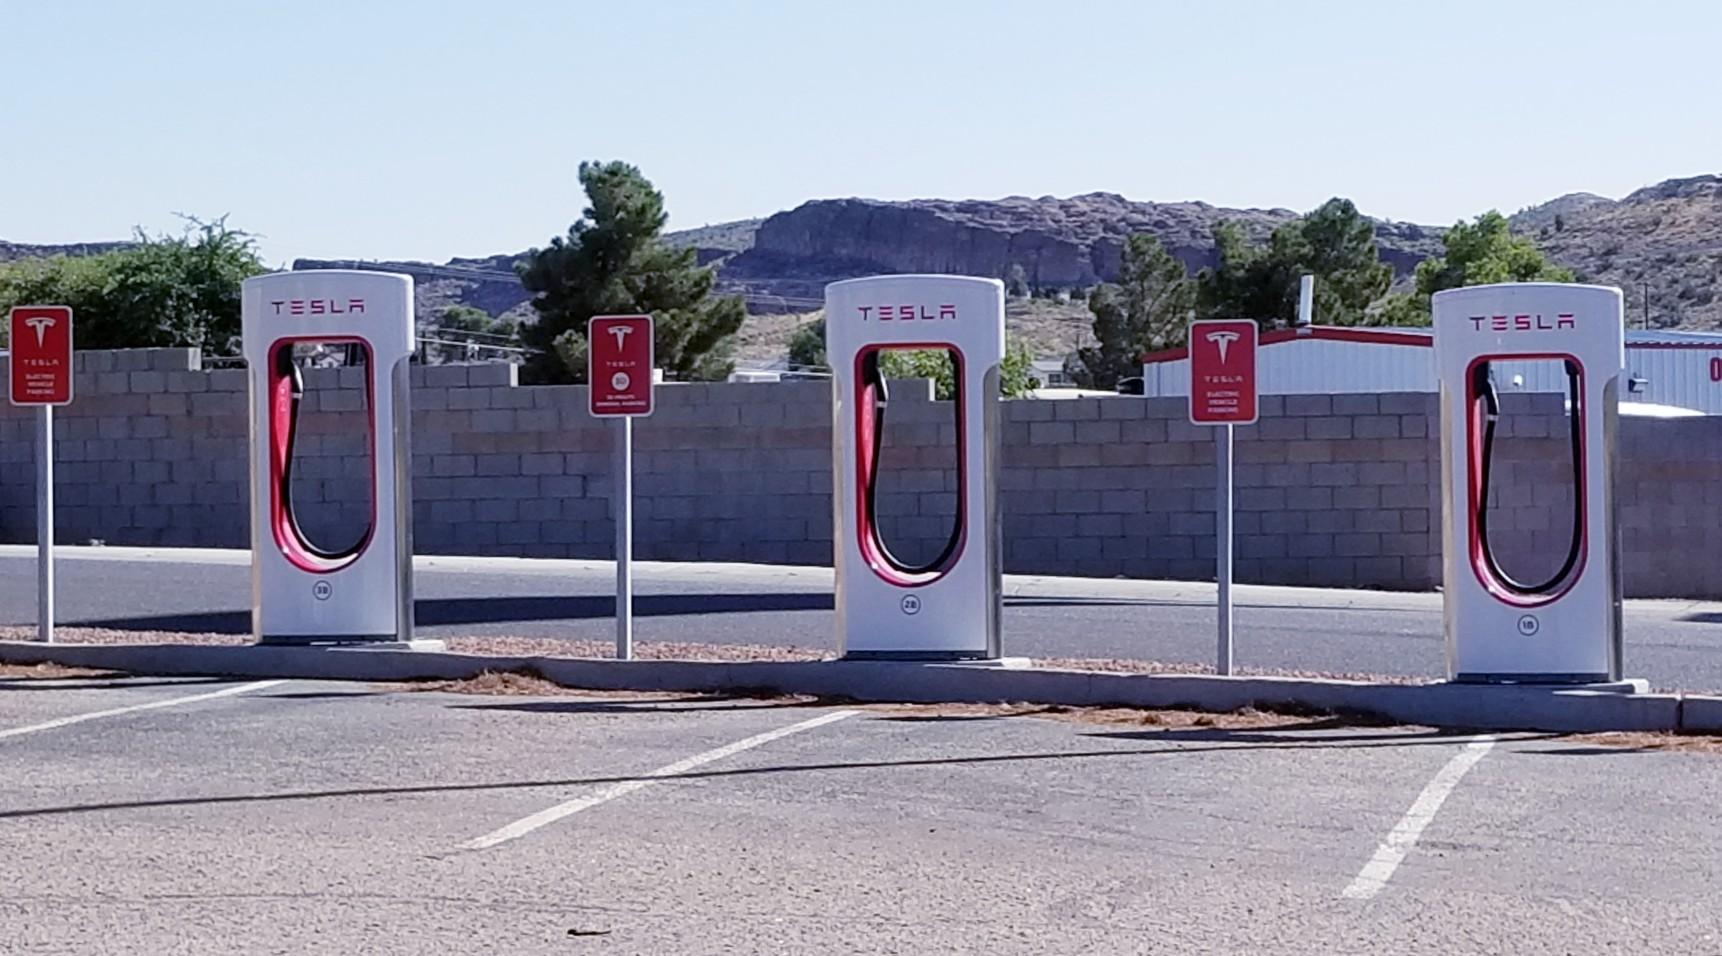 Some customers aren’t happy with Tesla’s charging stations